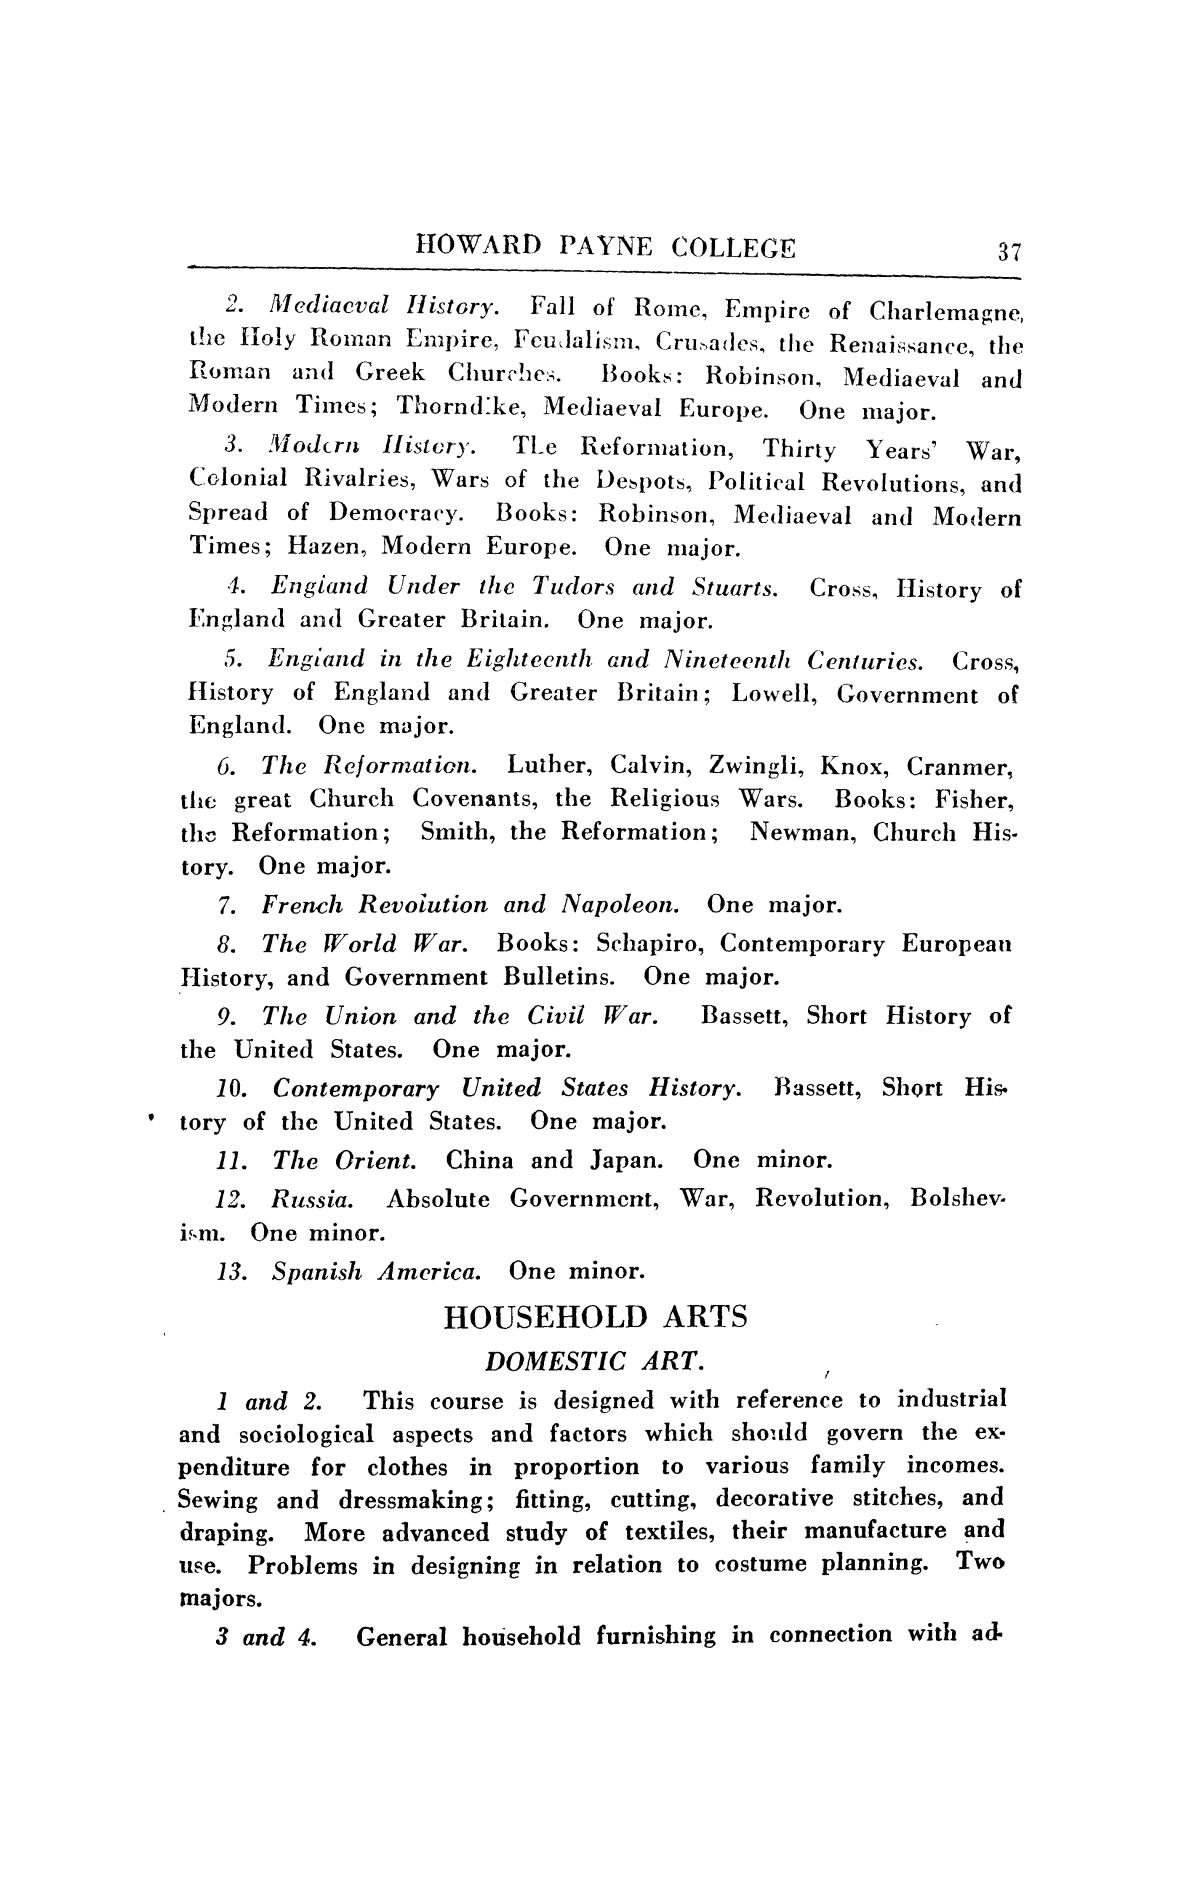 Catalogue of Howard Payne College, 1919-1920
                                                
                                                    37
                                                